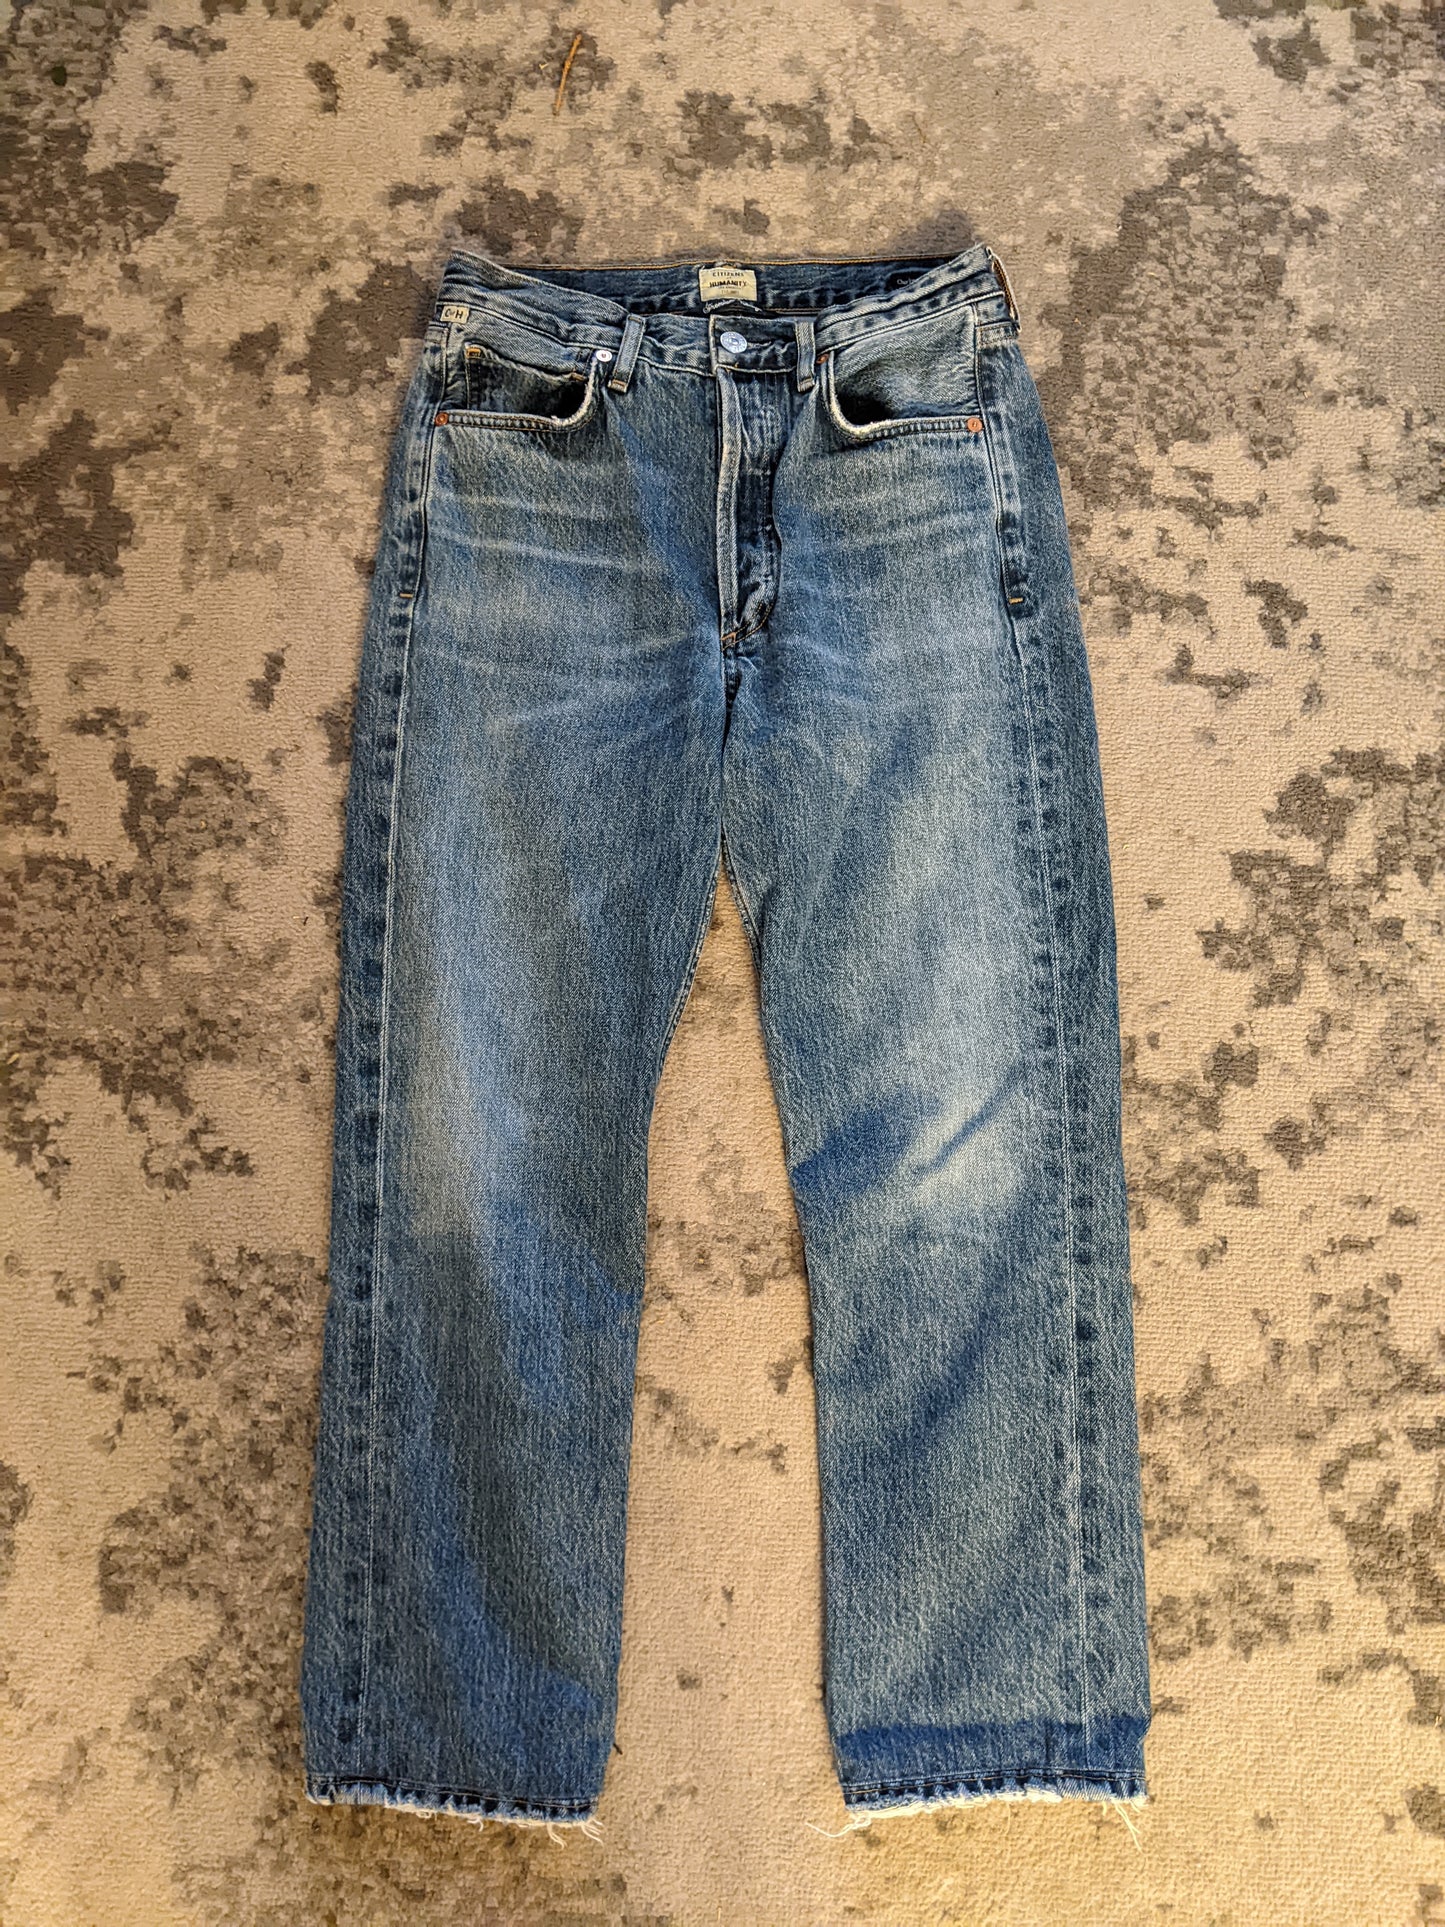 CITIZENS OF HUMANITY
Charlotte high-rise straight-leg jeans sz 25